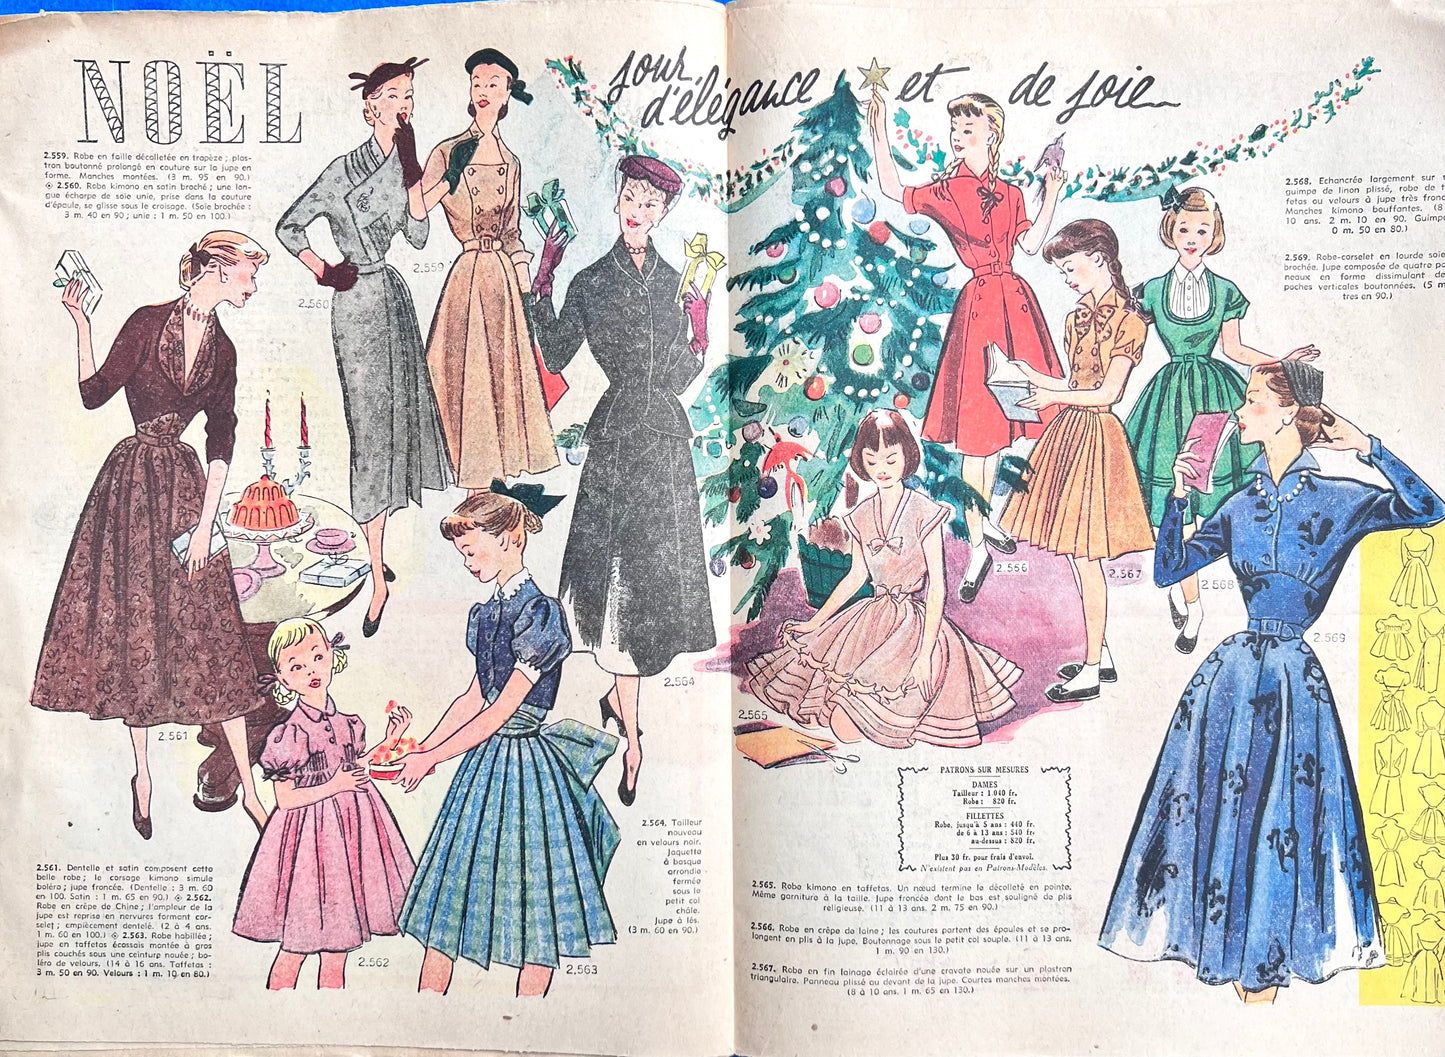 Full of Christmas Cheer in December 1950 issue of French Petit Echo de la Mode